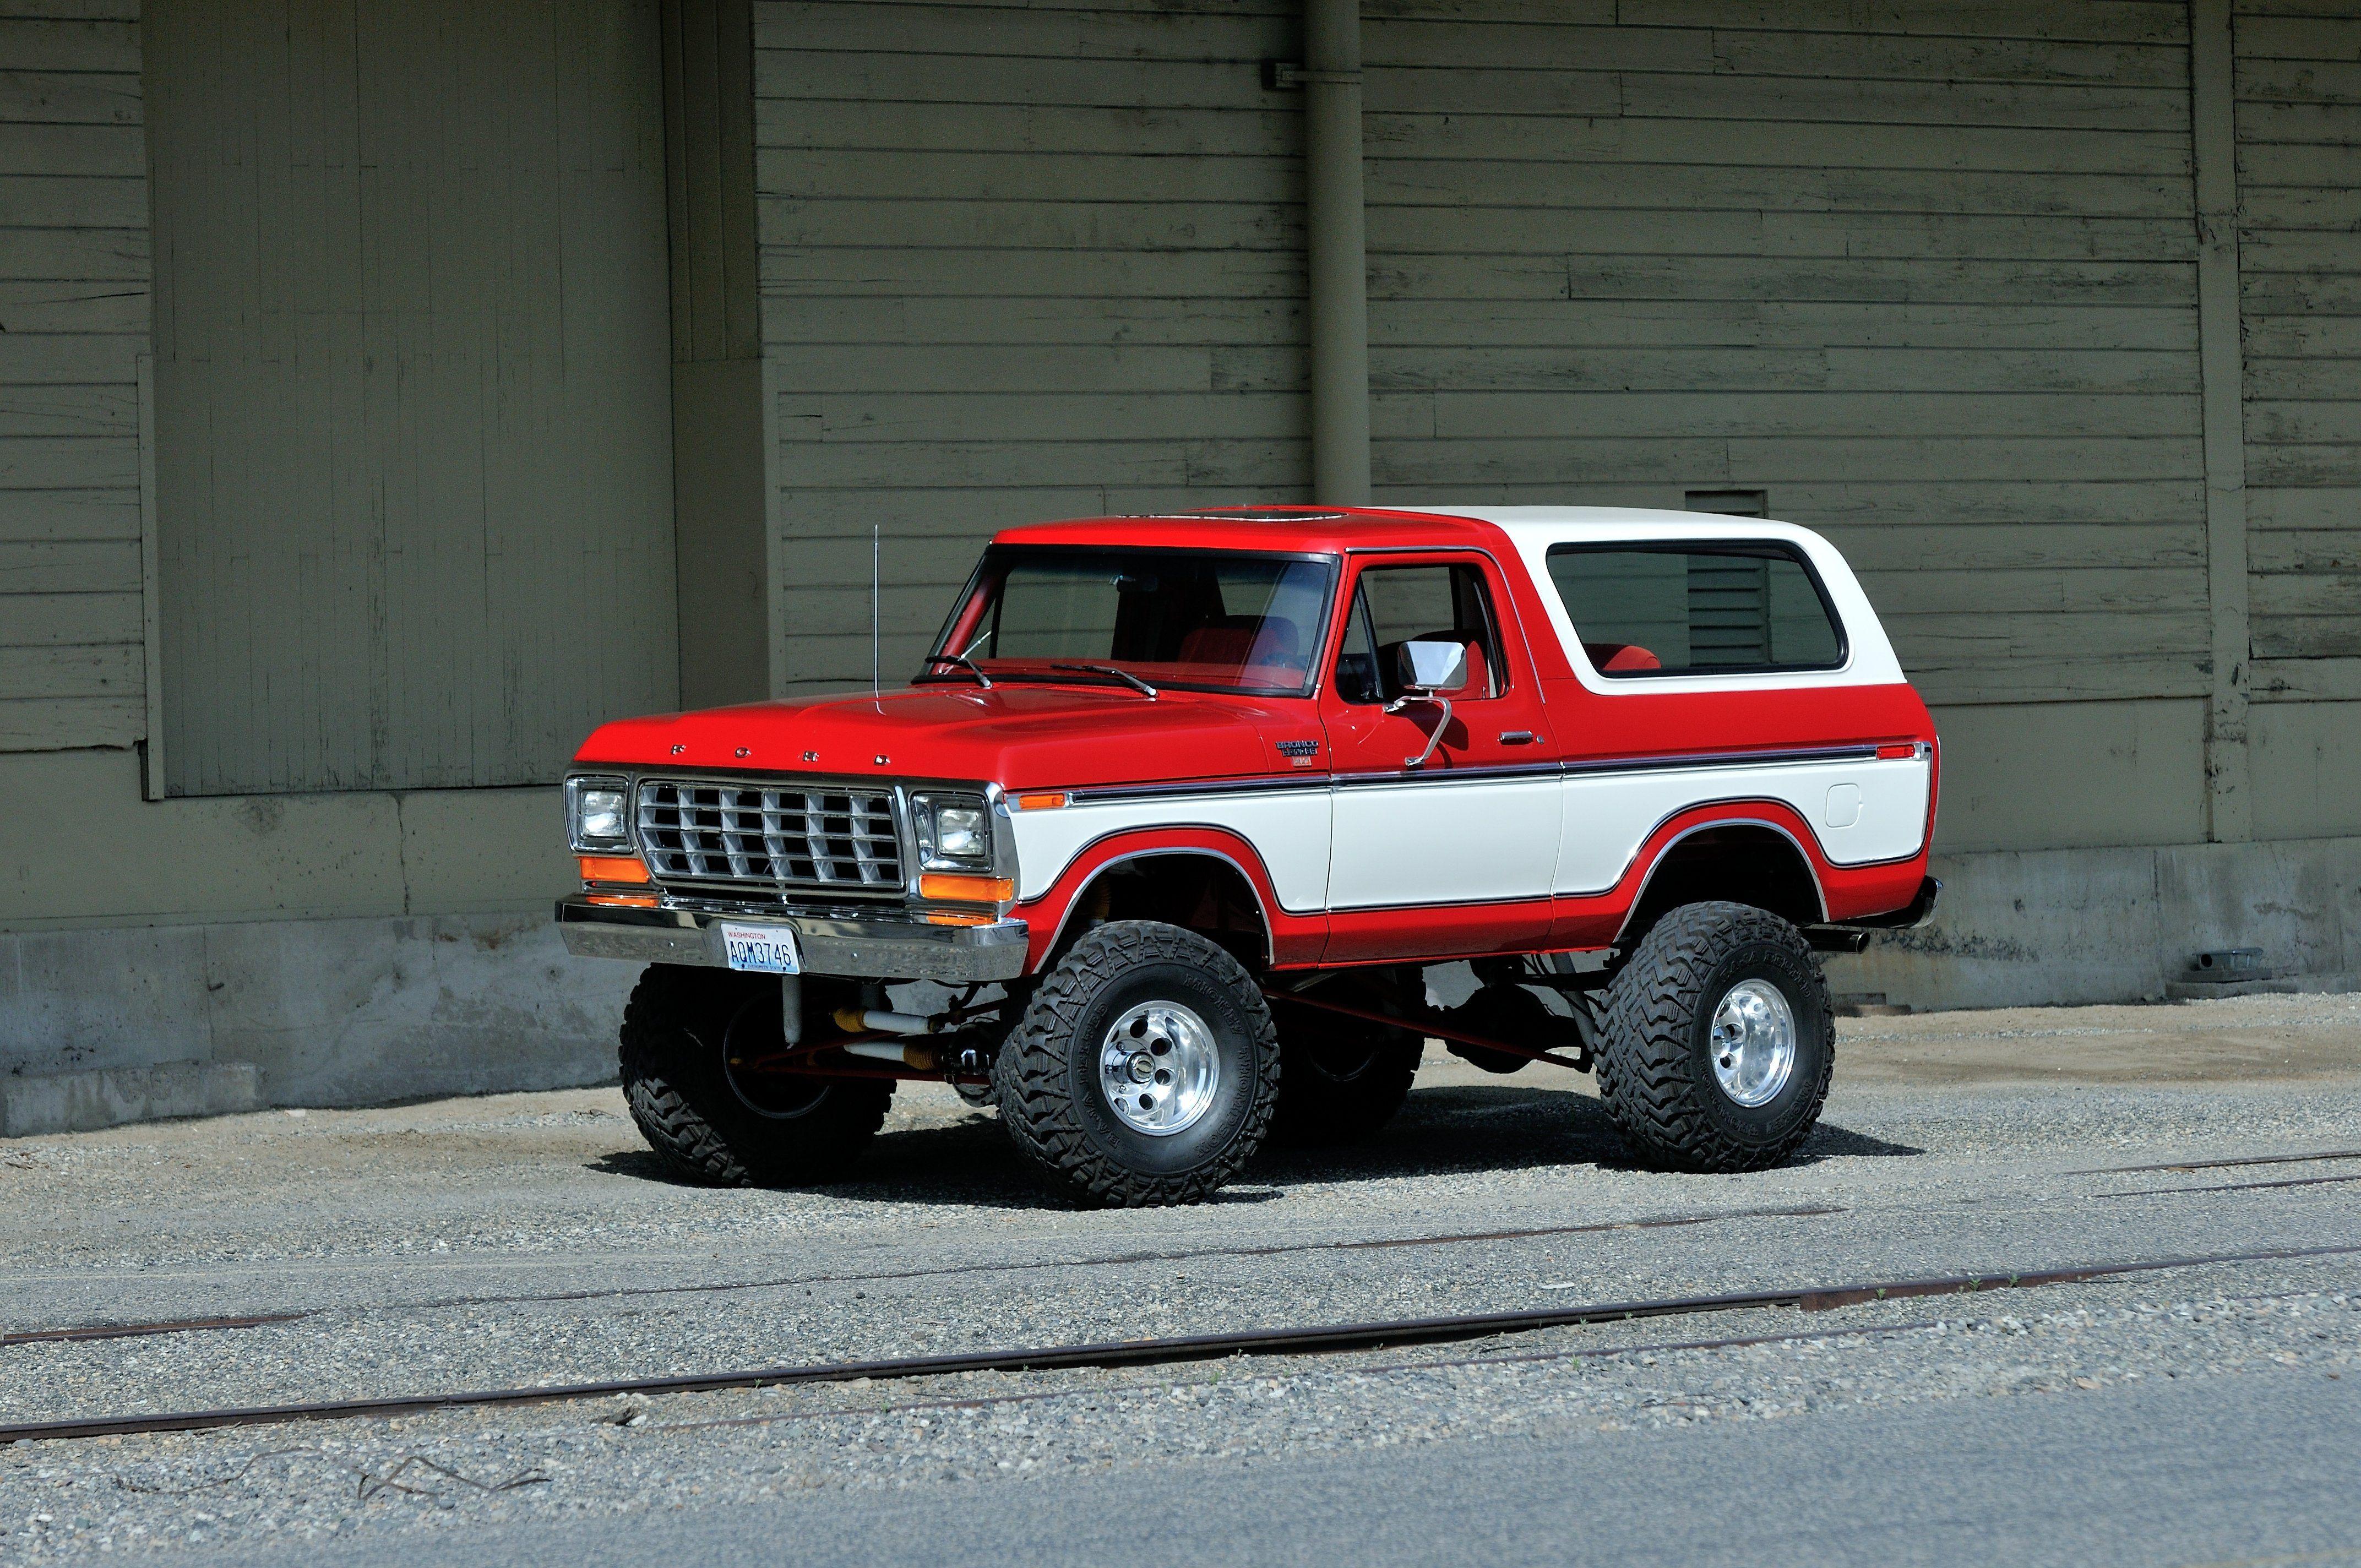 Ford Bronco Wallpaper HD Photo, Wallpaper and other Image